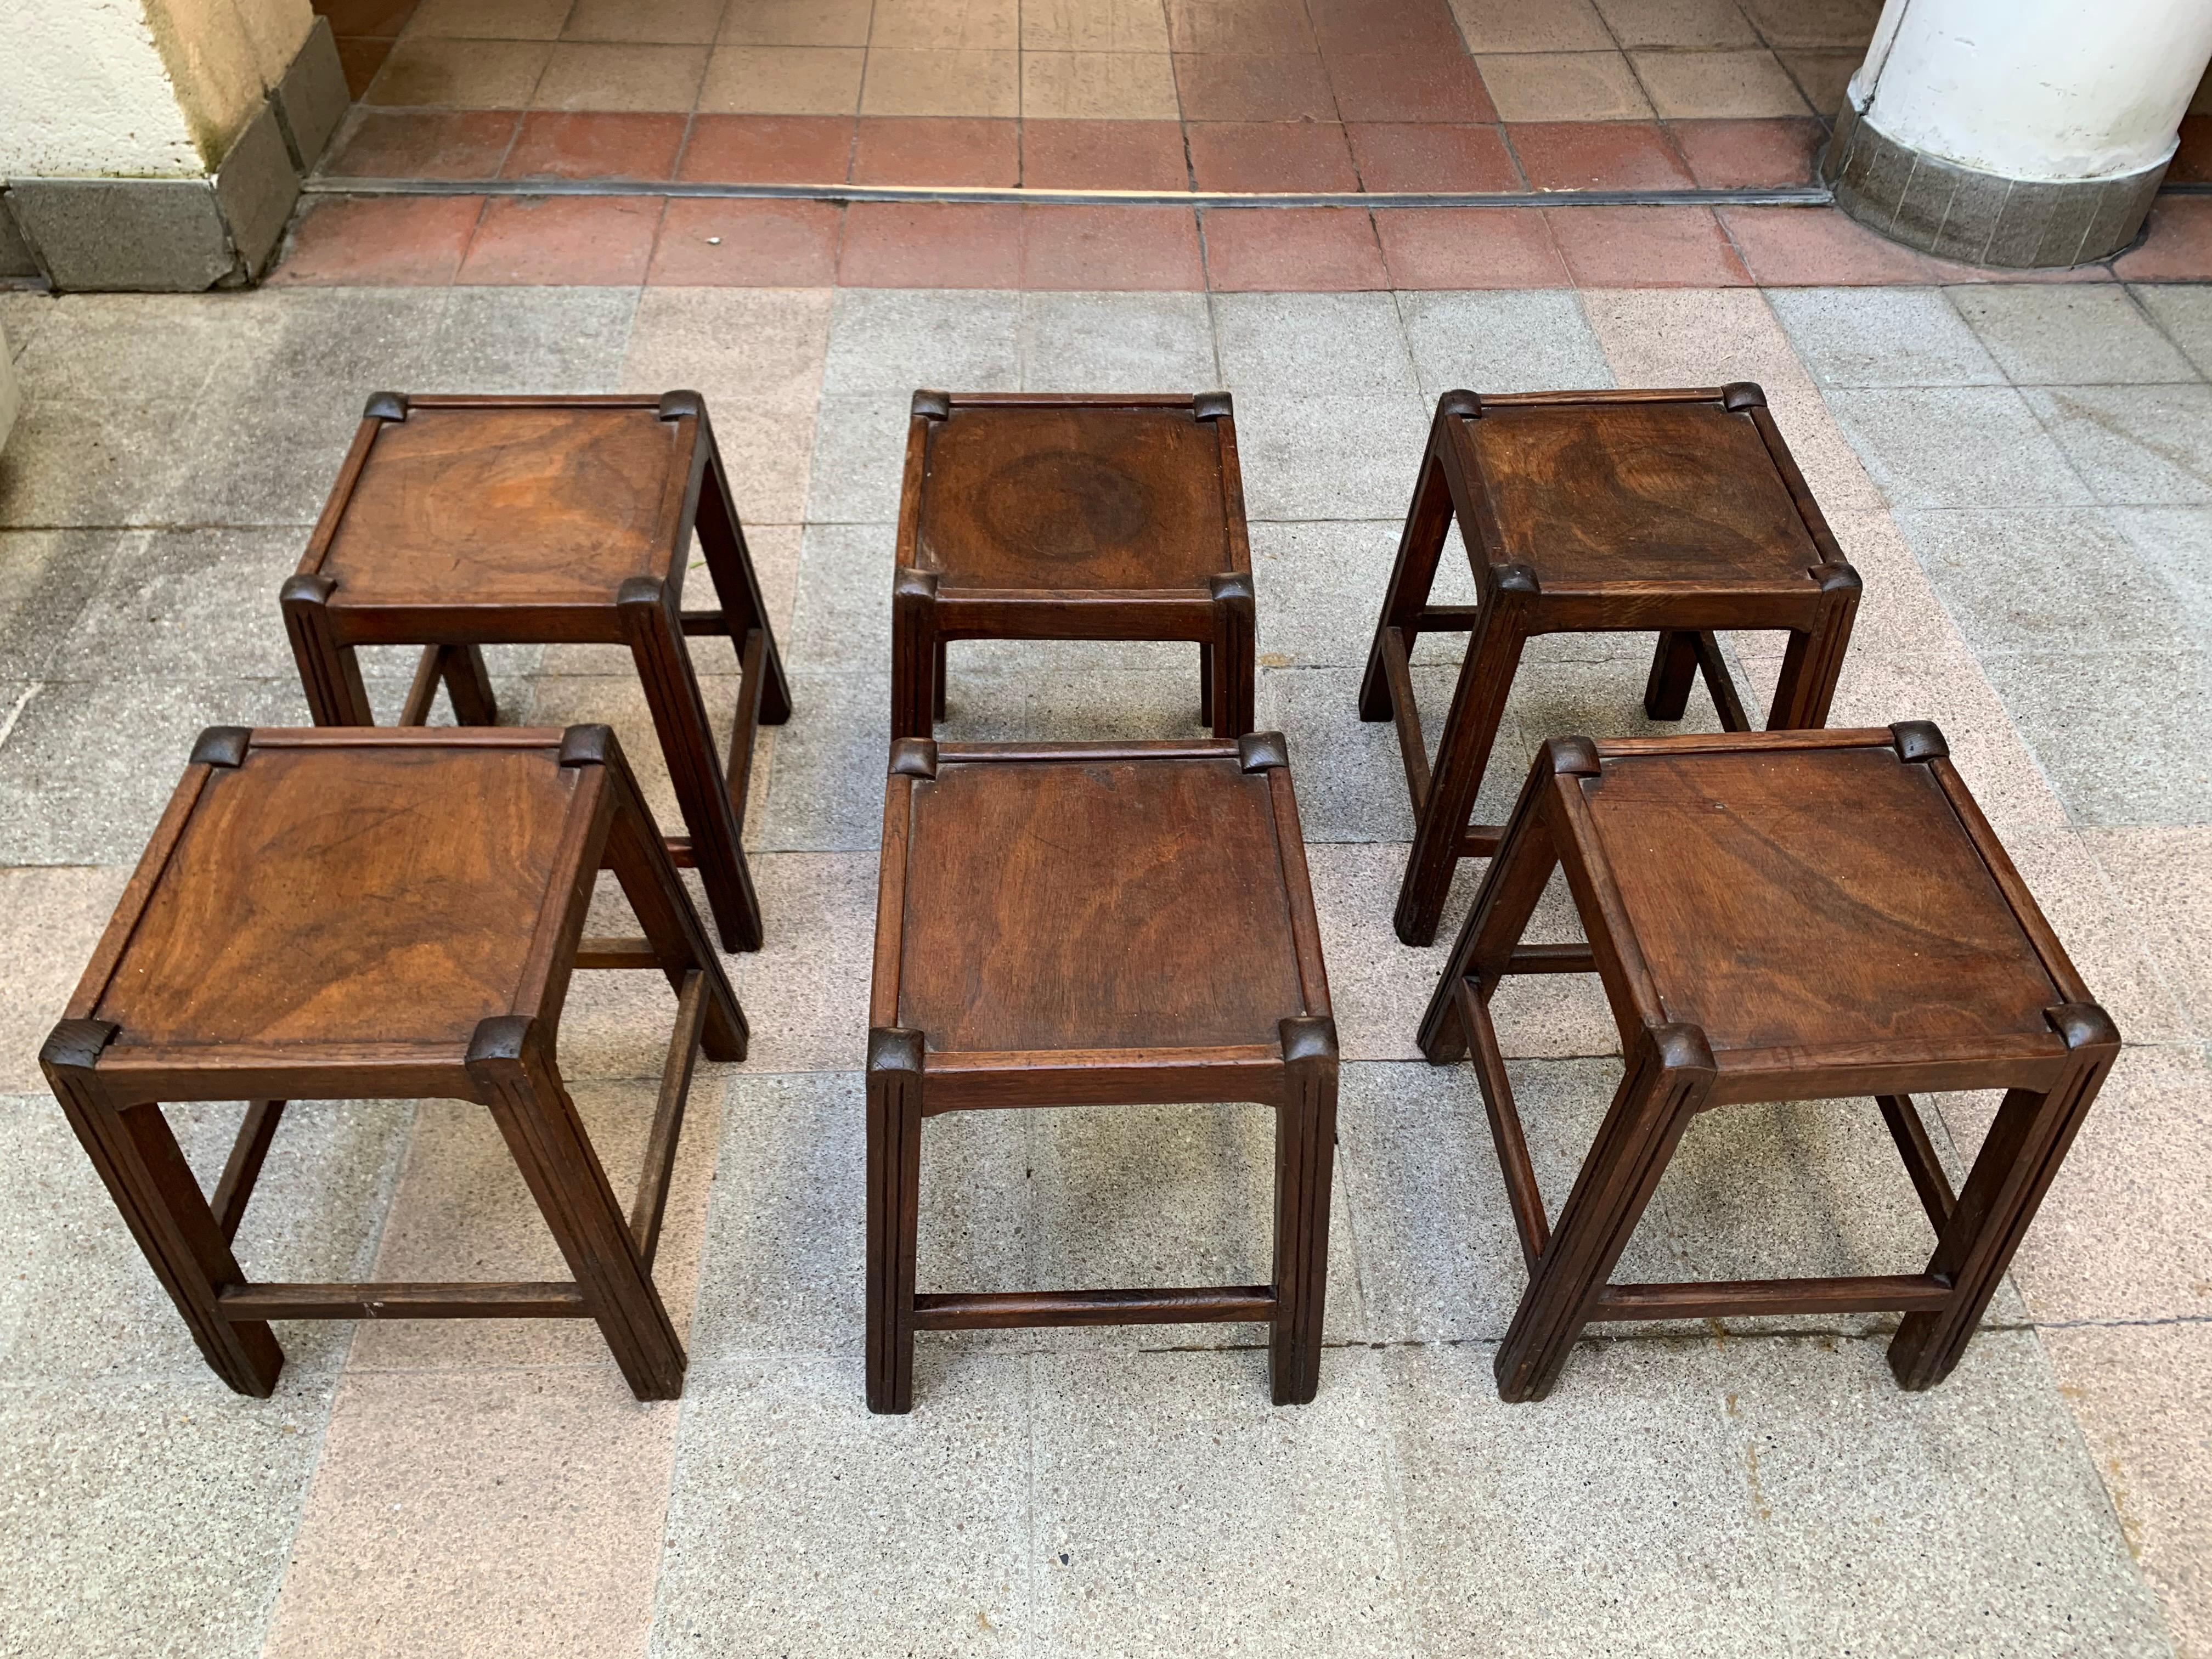 6 Stools for the Resort of Les Arcs 1